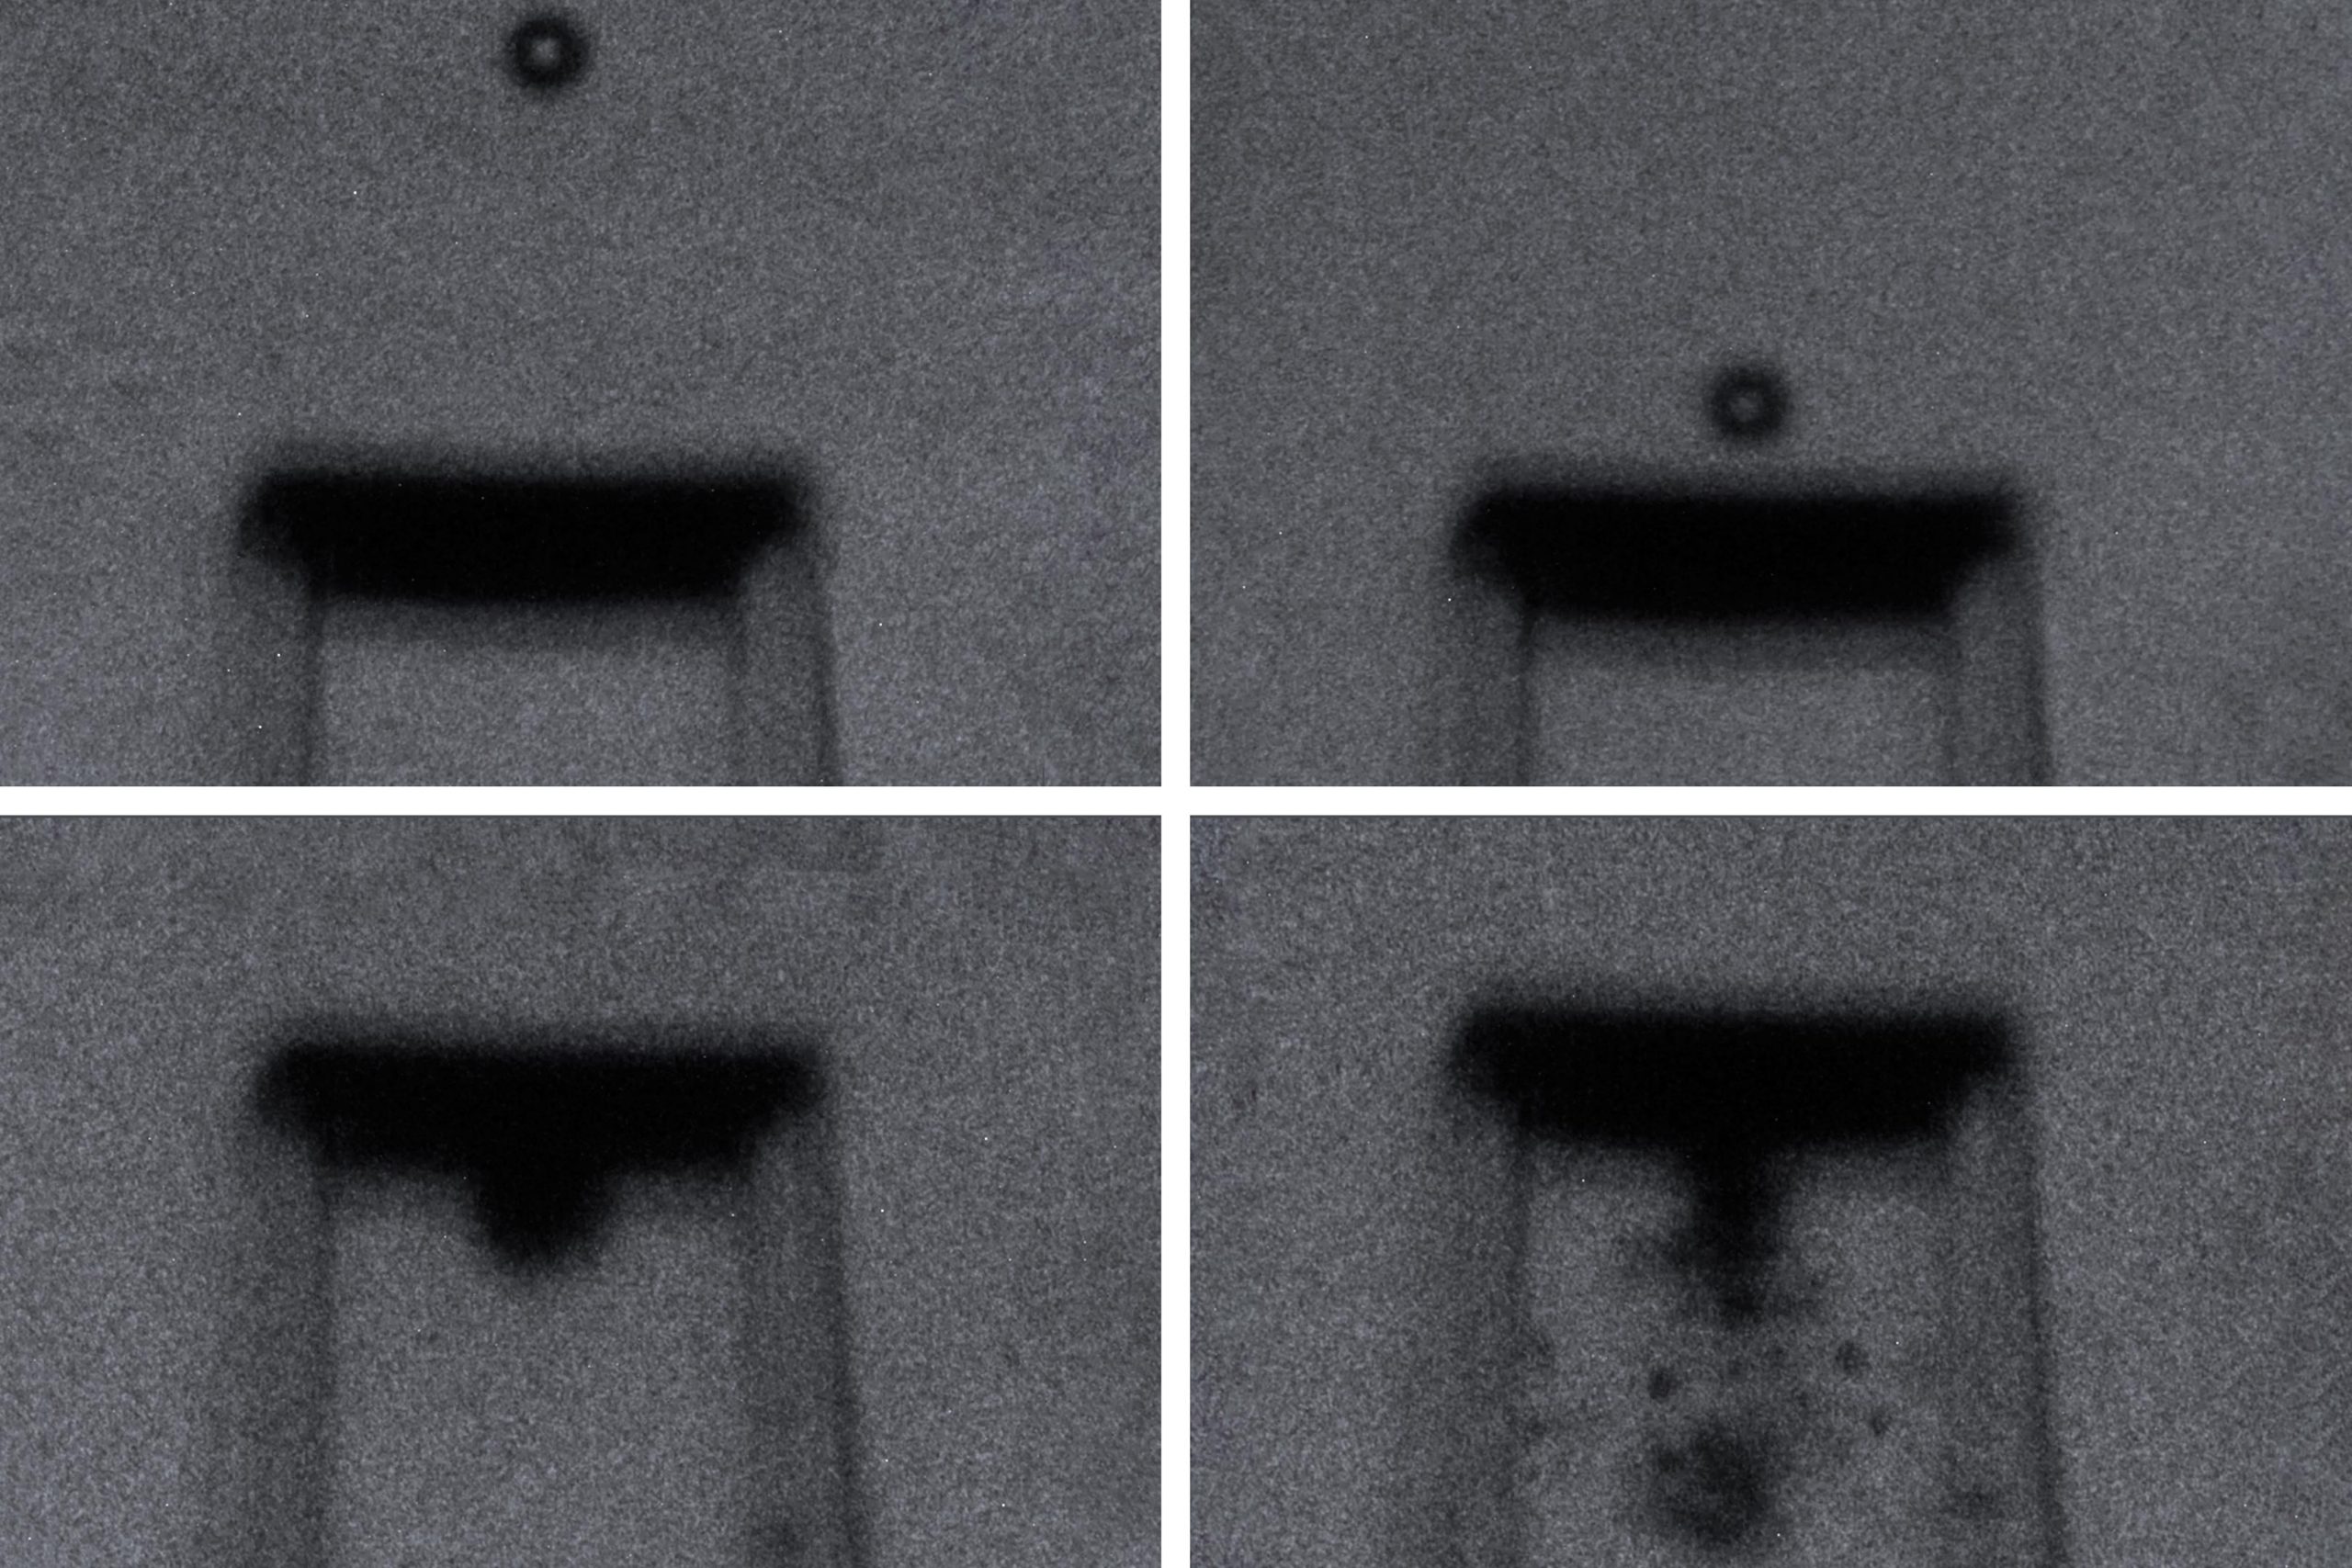 Firing-Microparticles-at-Supersonic-Speeds-Metamaterial-Resilience-Test-scaled.jpg